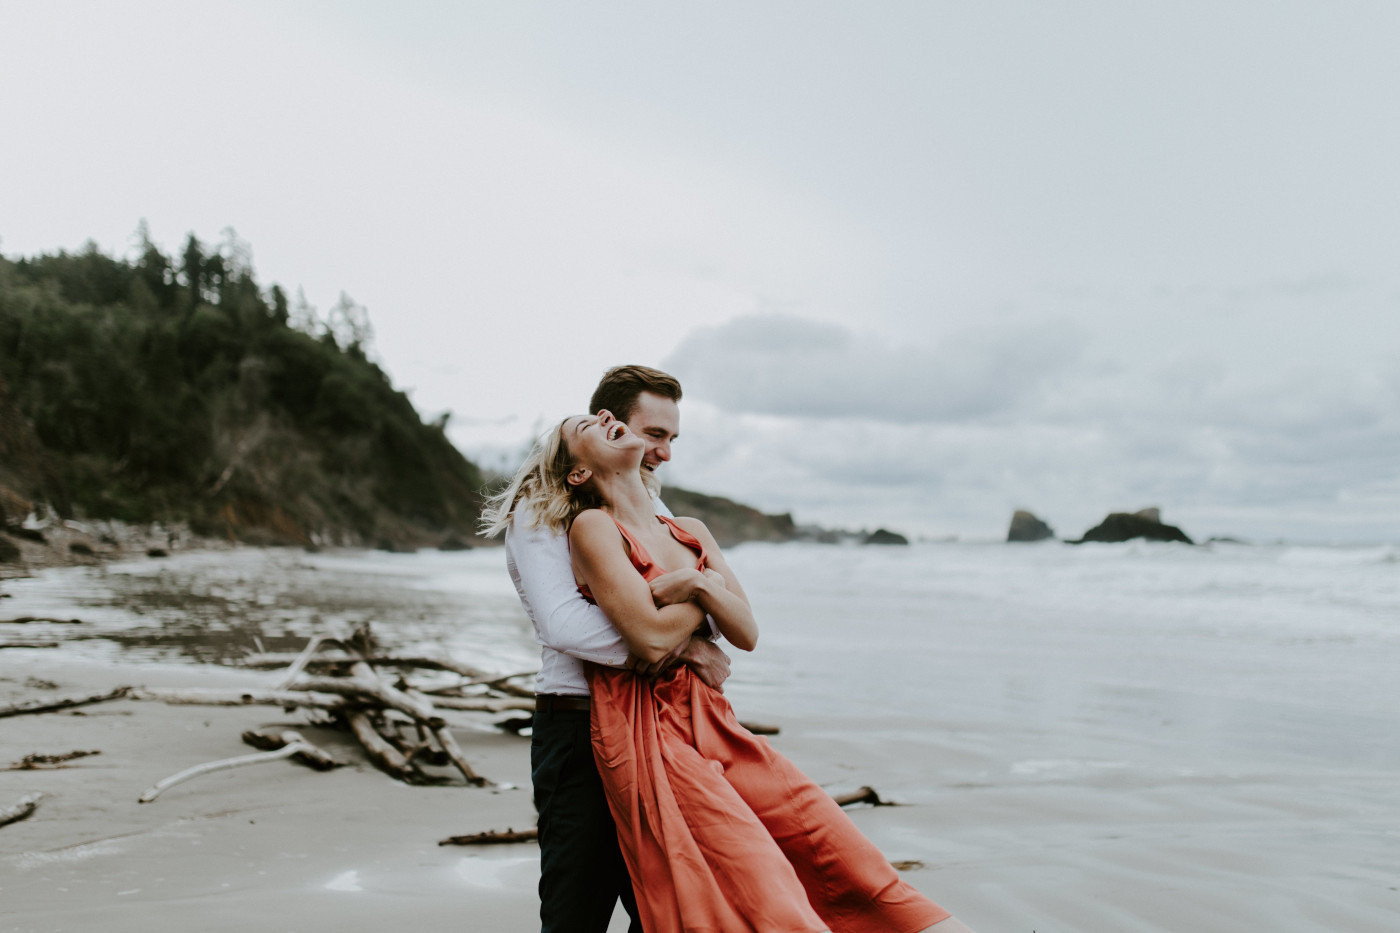 Billy swings Chelsey on the beach. Elopement wedding photography at Cannon Beach by Sienna Plus Josh.